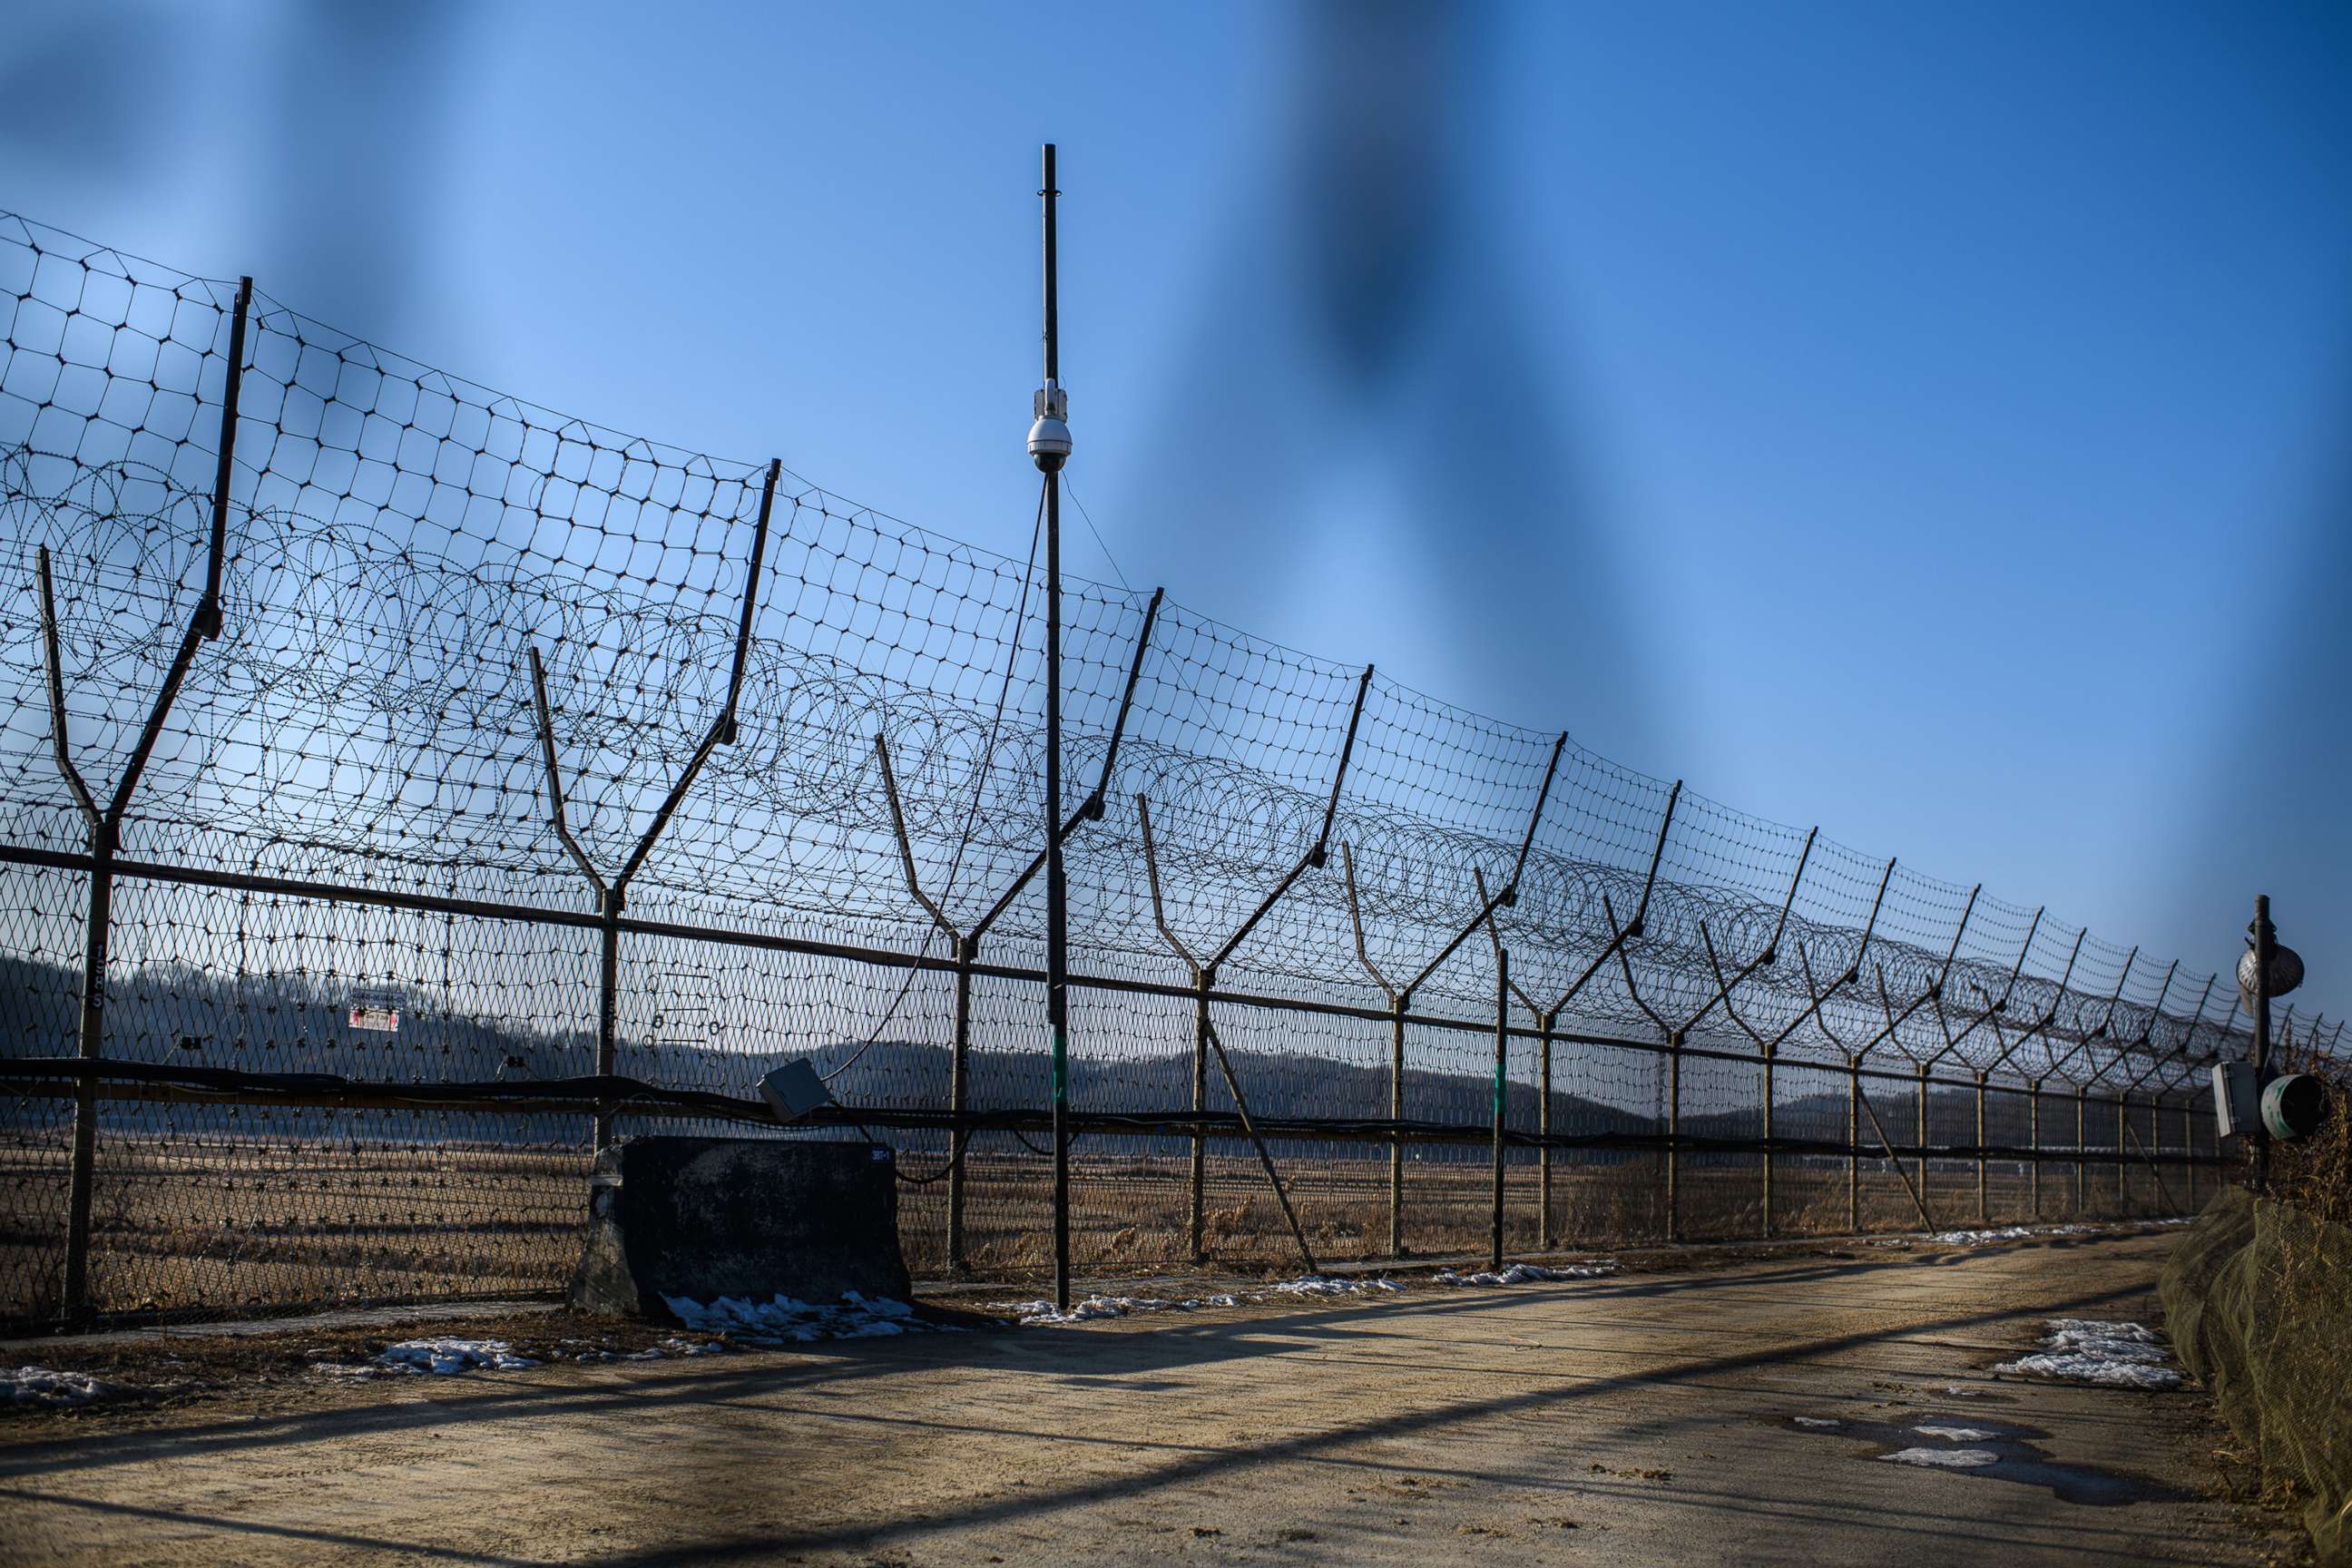 3 North Korean defectors talk about what it was like crossing the demilitarized zone